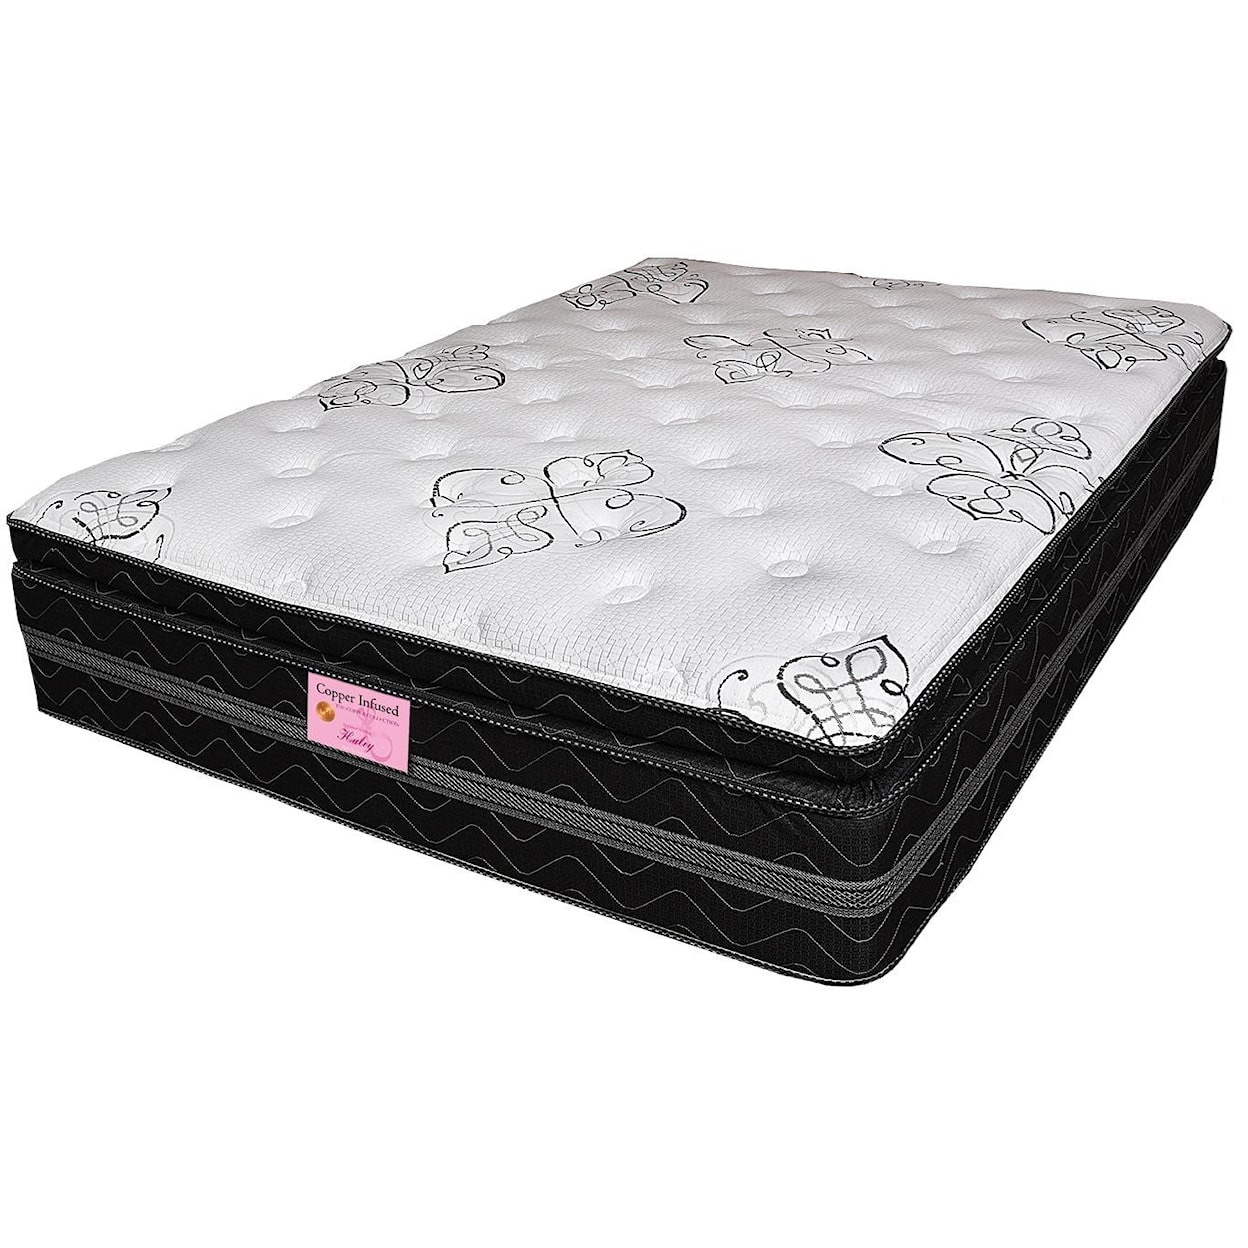 United Bedding Haley P Full Pocketed Coil Mattress